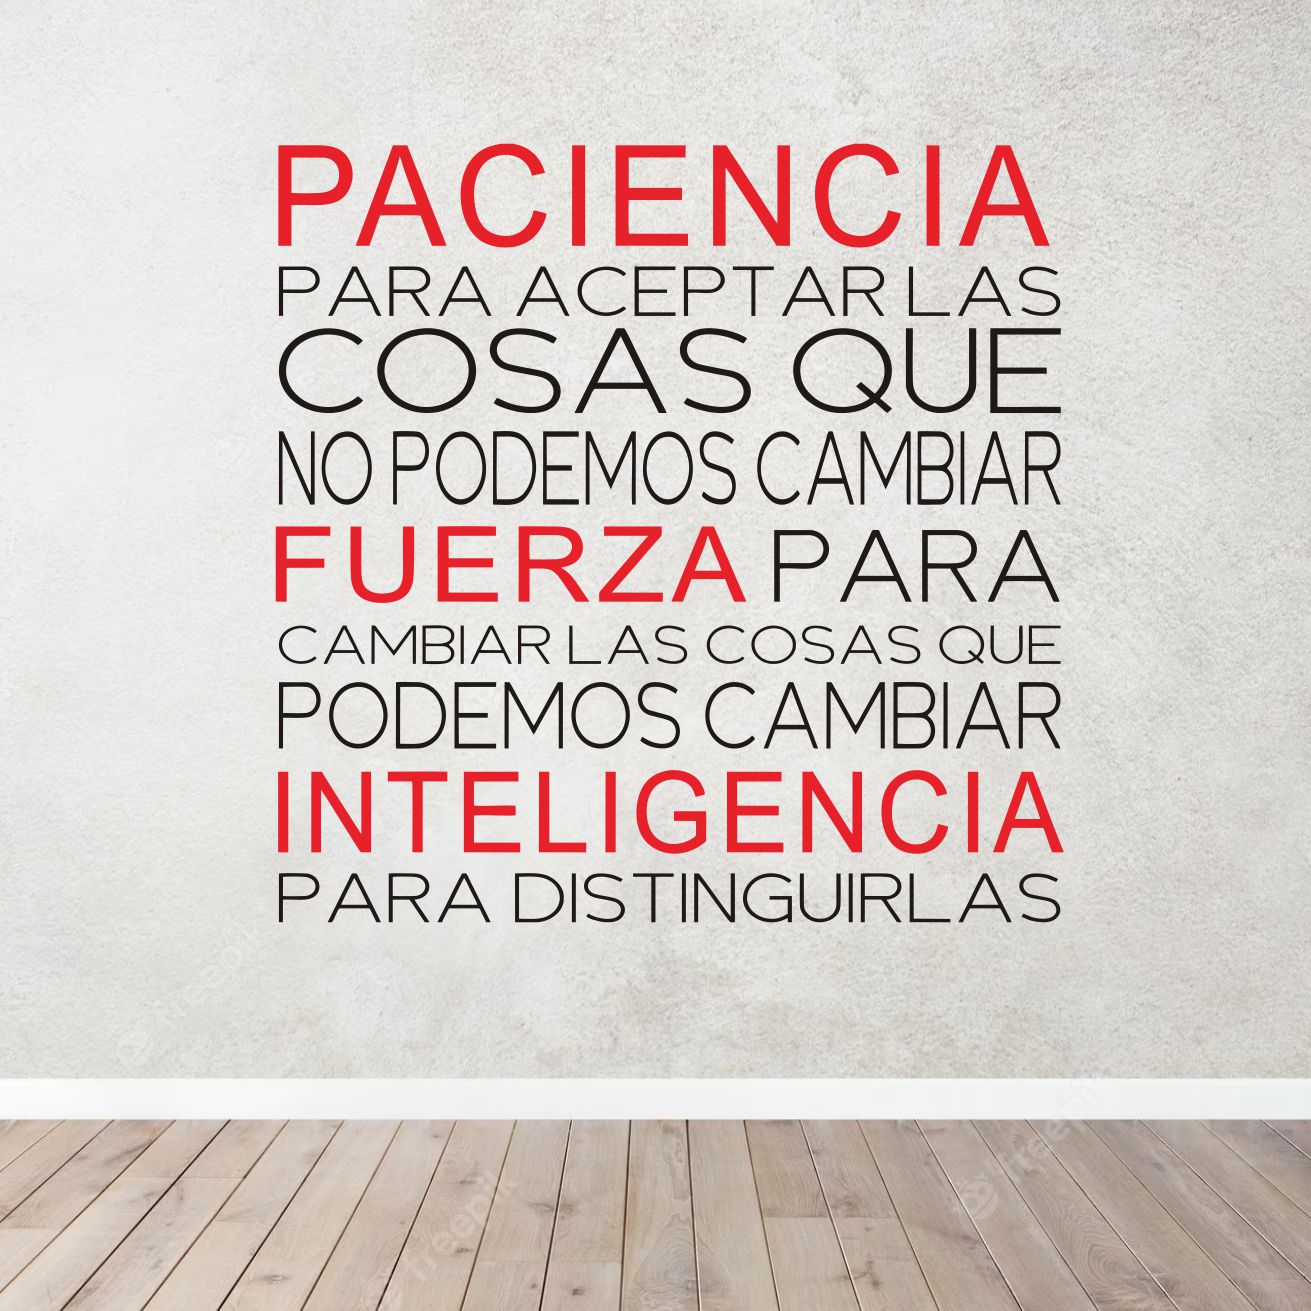 Frases y texto